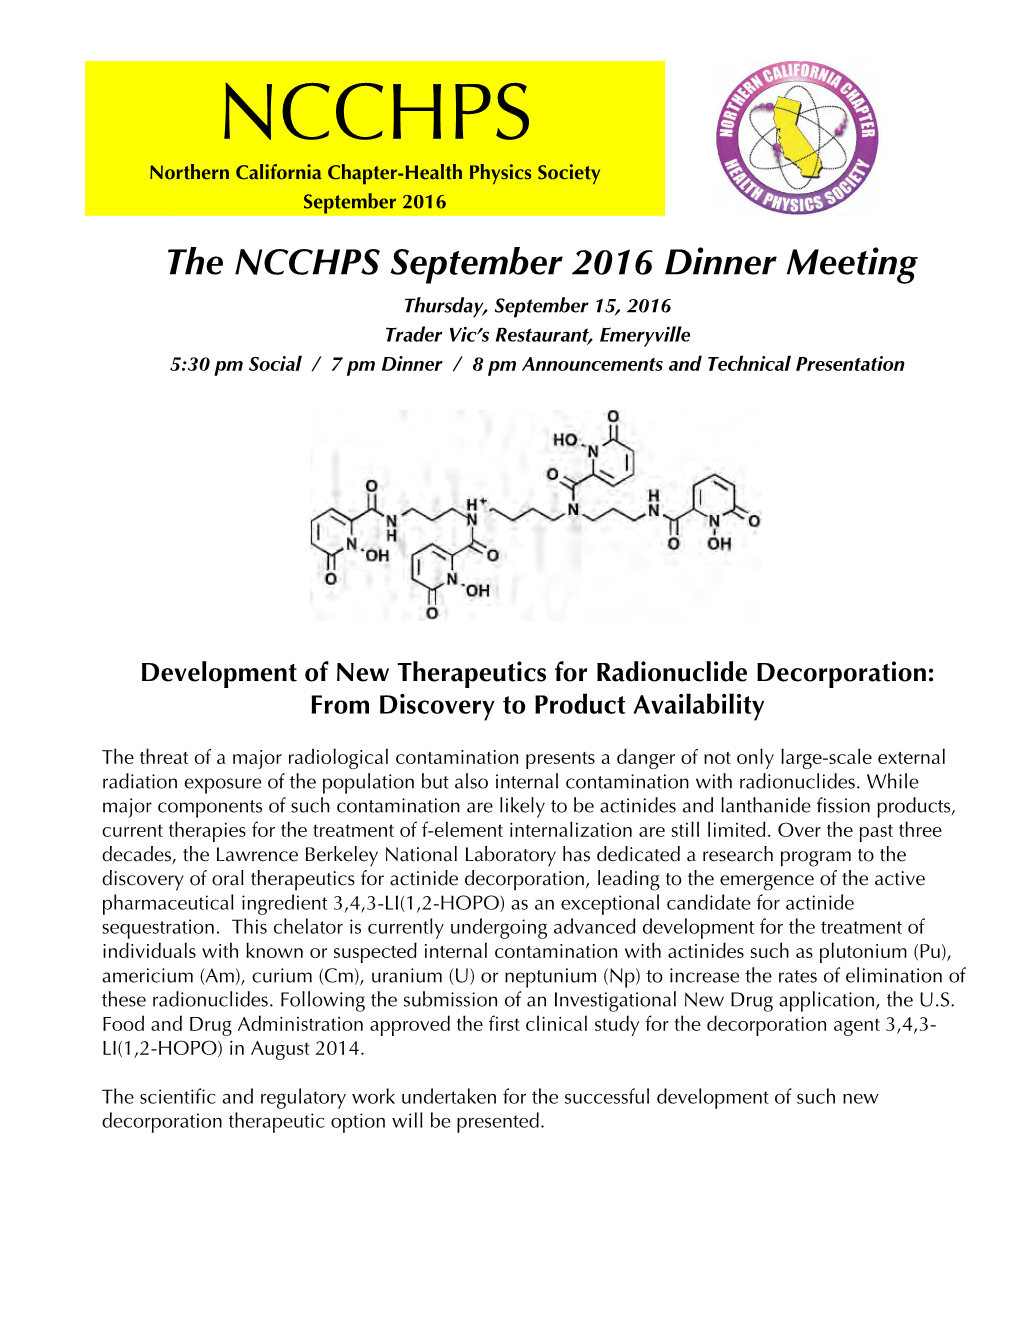 NCCHPS Northern California Chapter-Health Physics Society September 2016